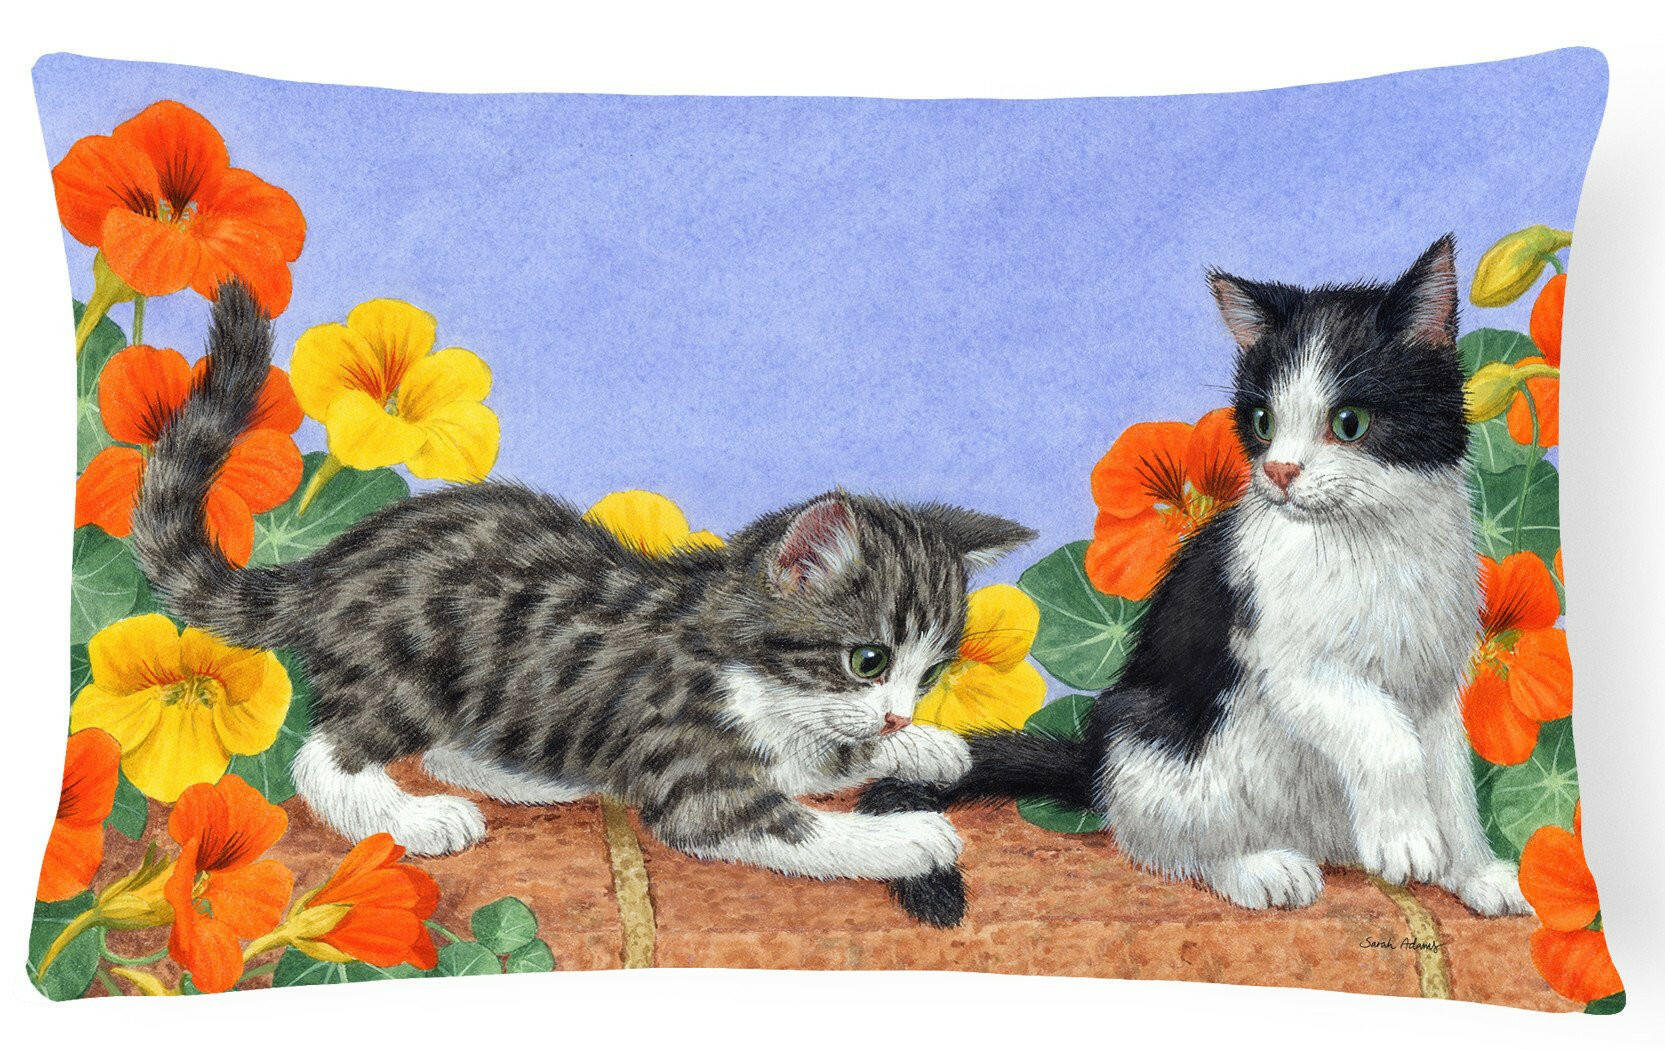 Kittens on Wall Fabric Decorative Pillow ASA2201PW1216 by Caroline's Treasures